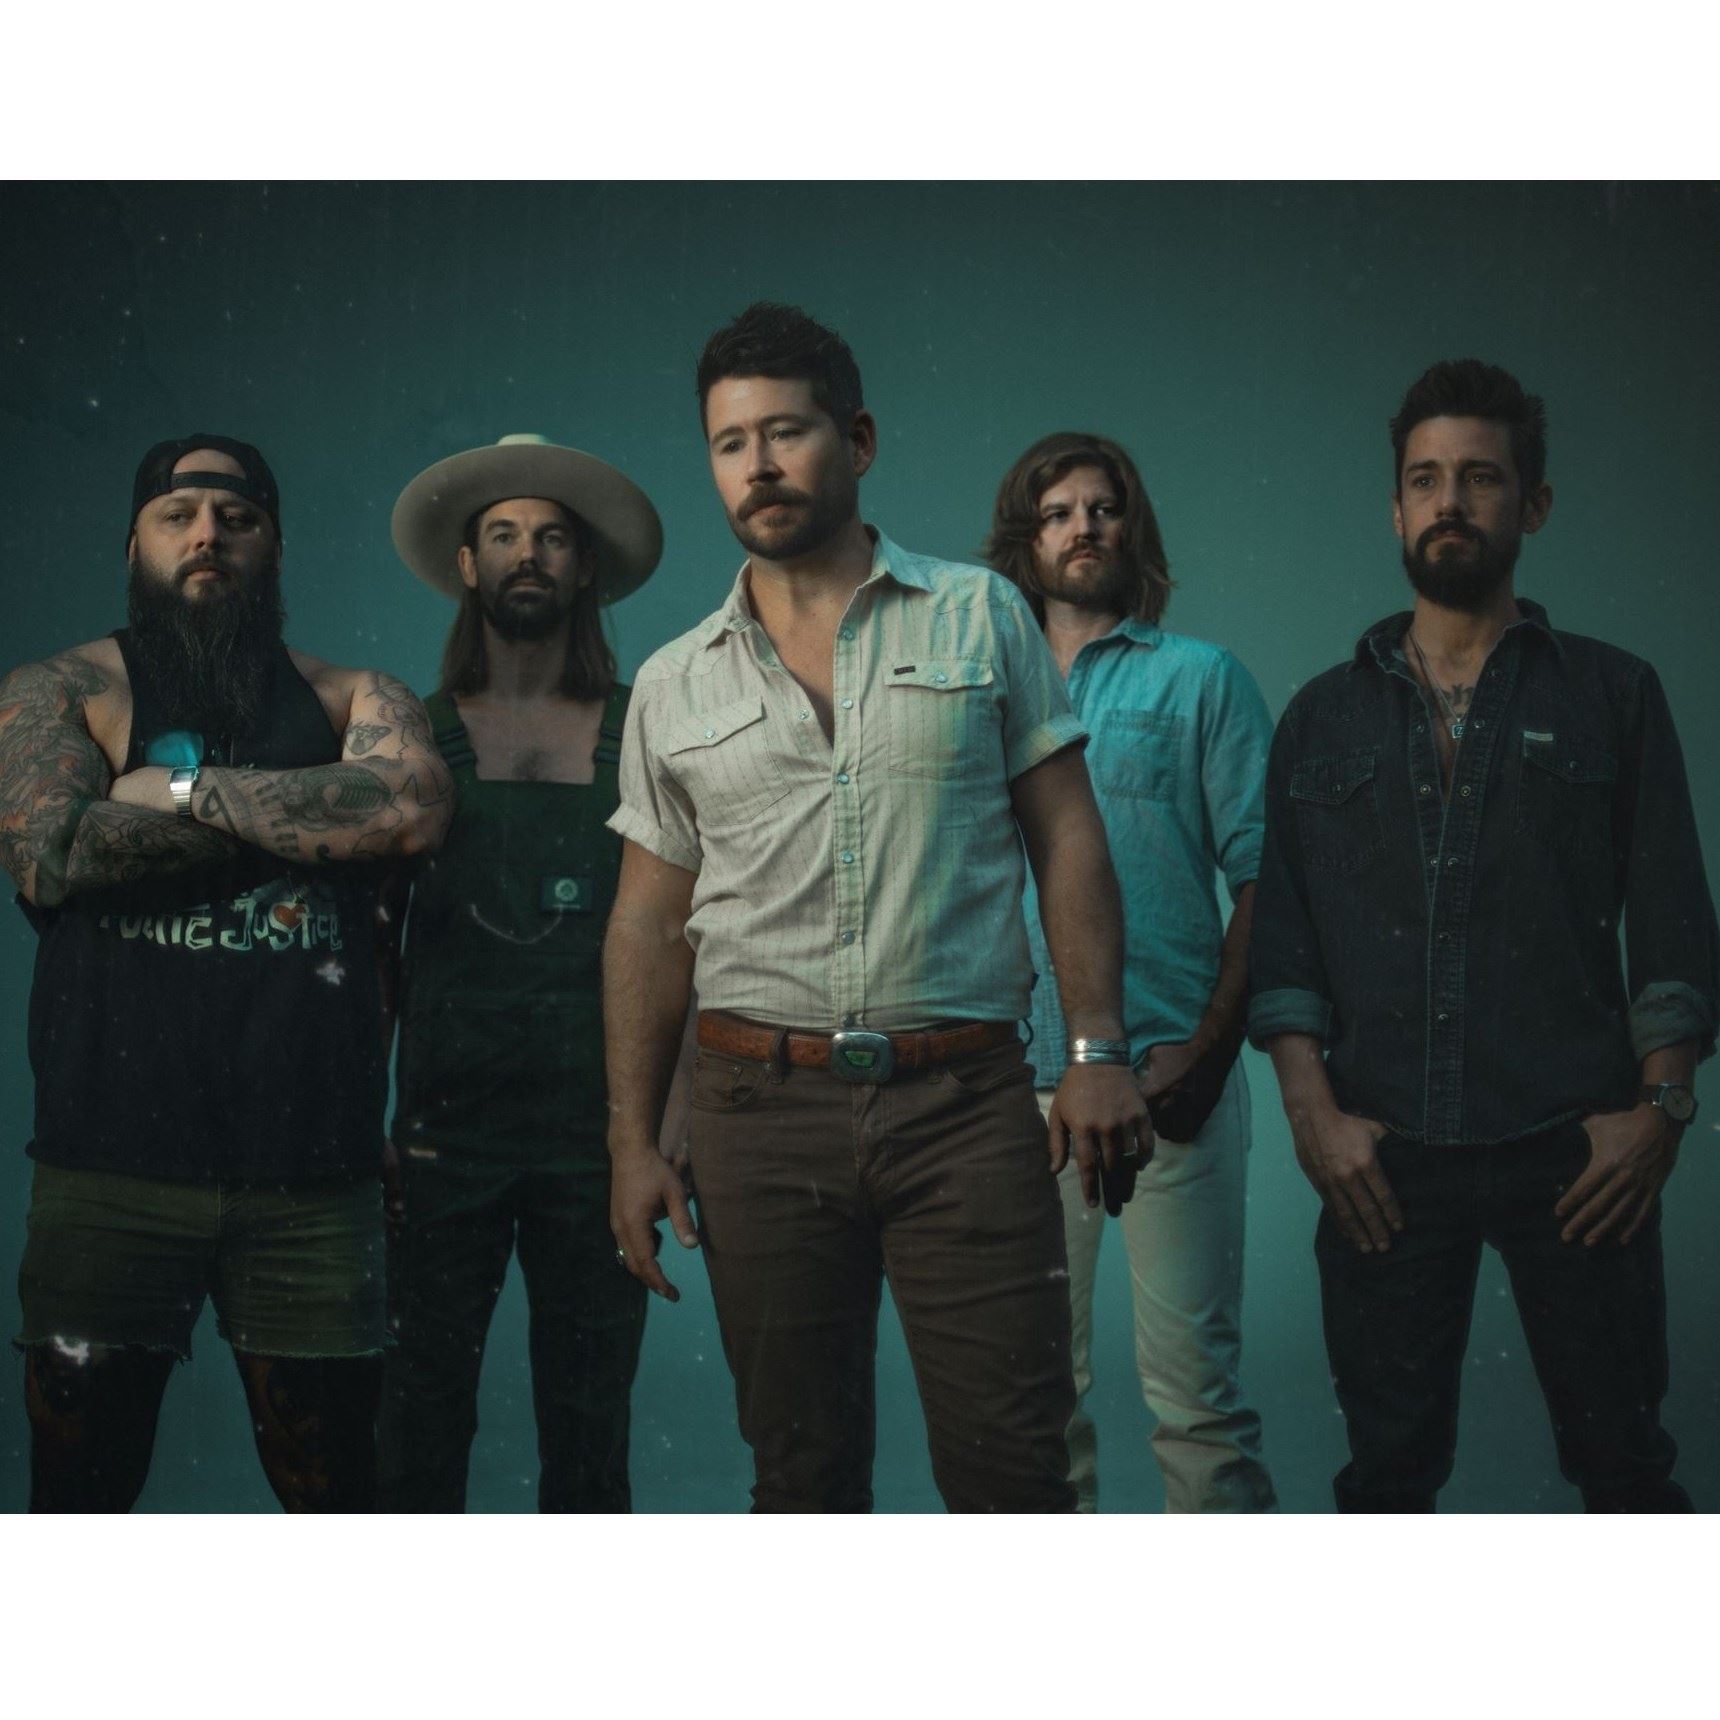 Shane Smith & The Saints with Zach Top